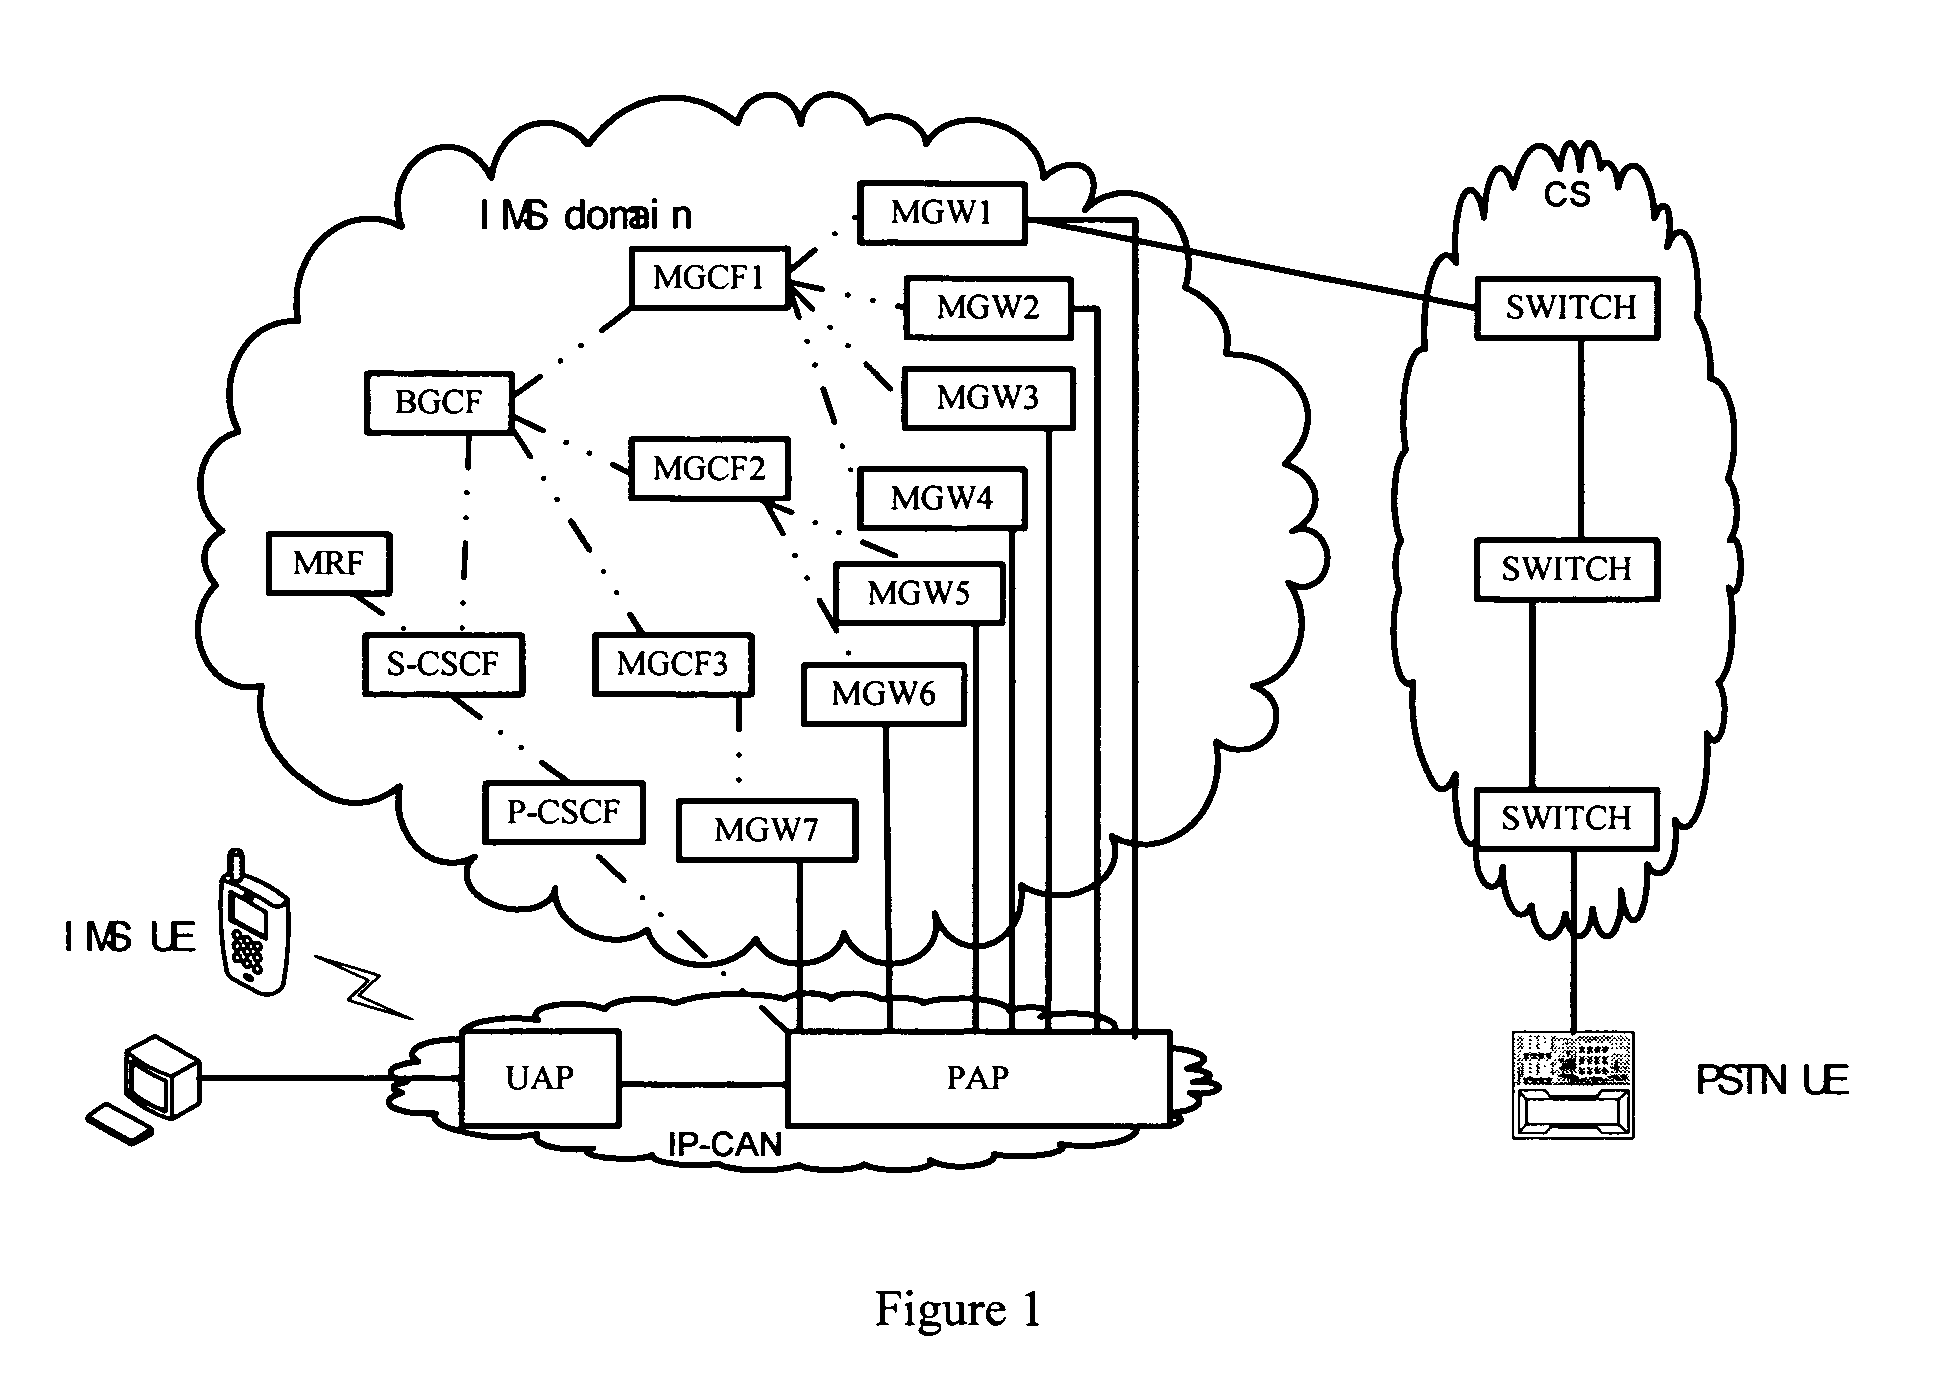 Method and means for route selection of a session